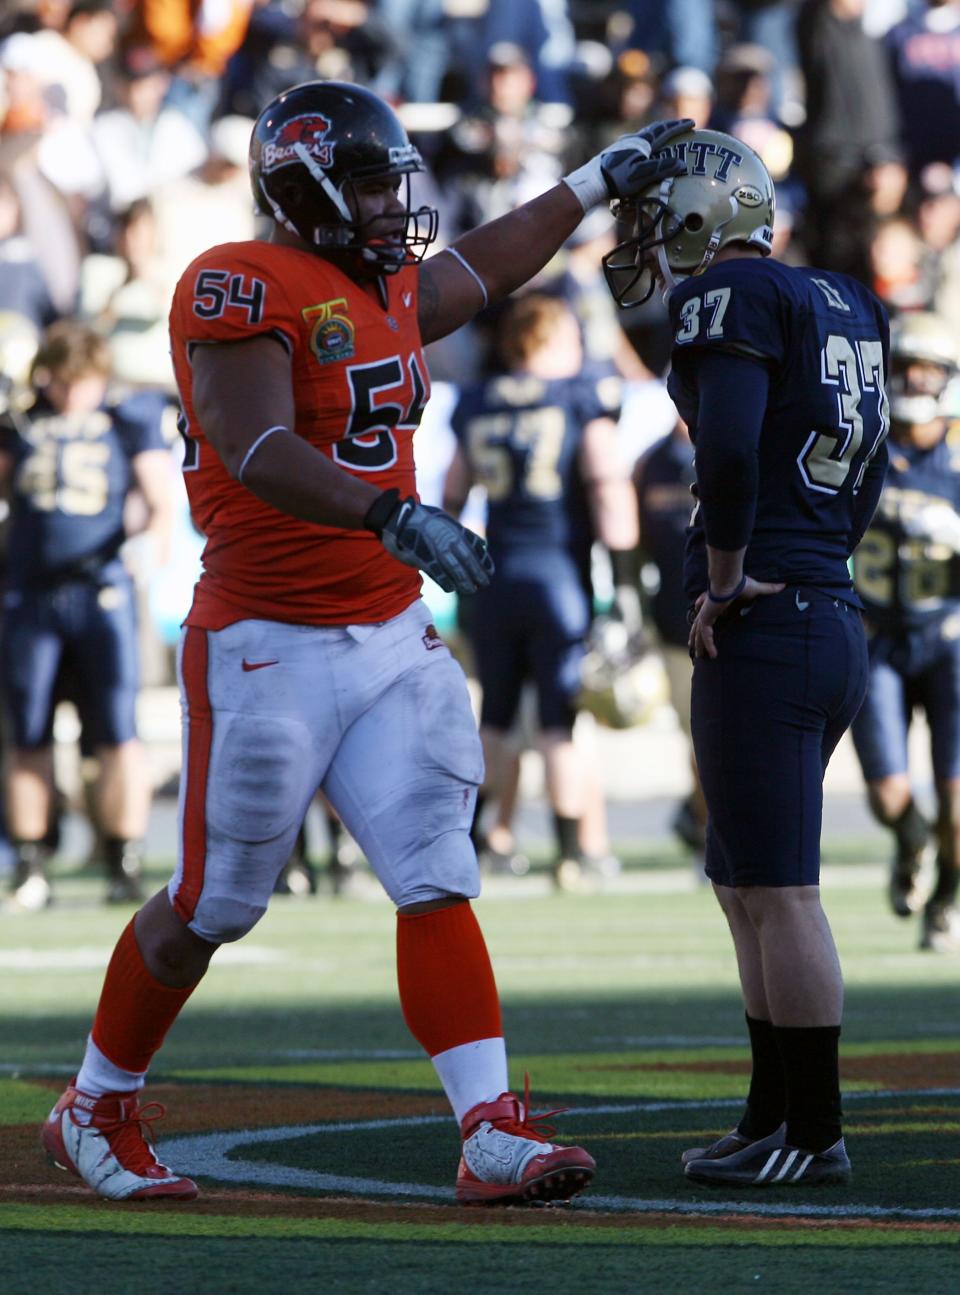 Defensive lineman Stephen Paea of Oregon State, left, pats kicker Conor Lee of Pitt on the helmet after Lee missed a 58-yard field goal attempt Dec. 31, 2008. No. 24 Oregon State beat No. 18 Pittsburgh 3-0.